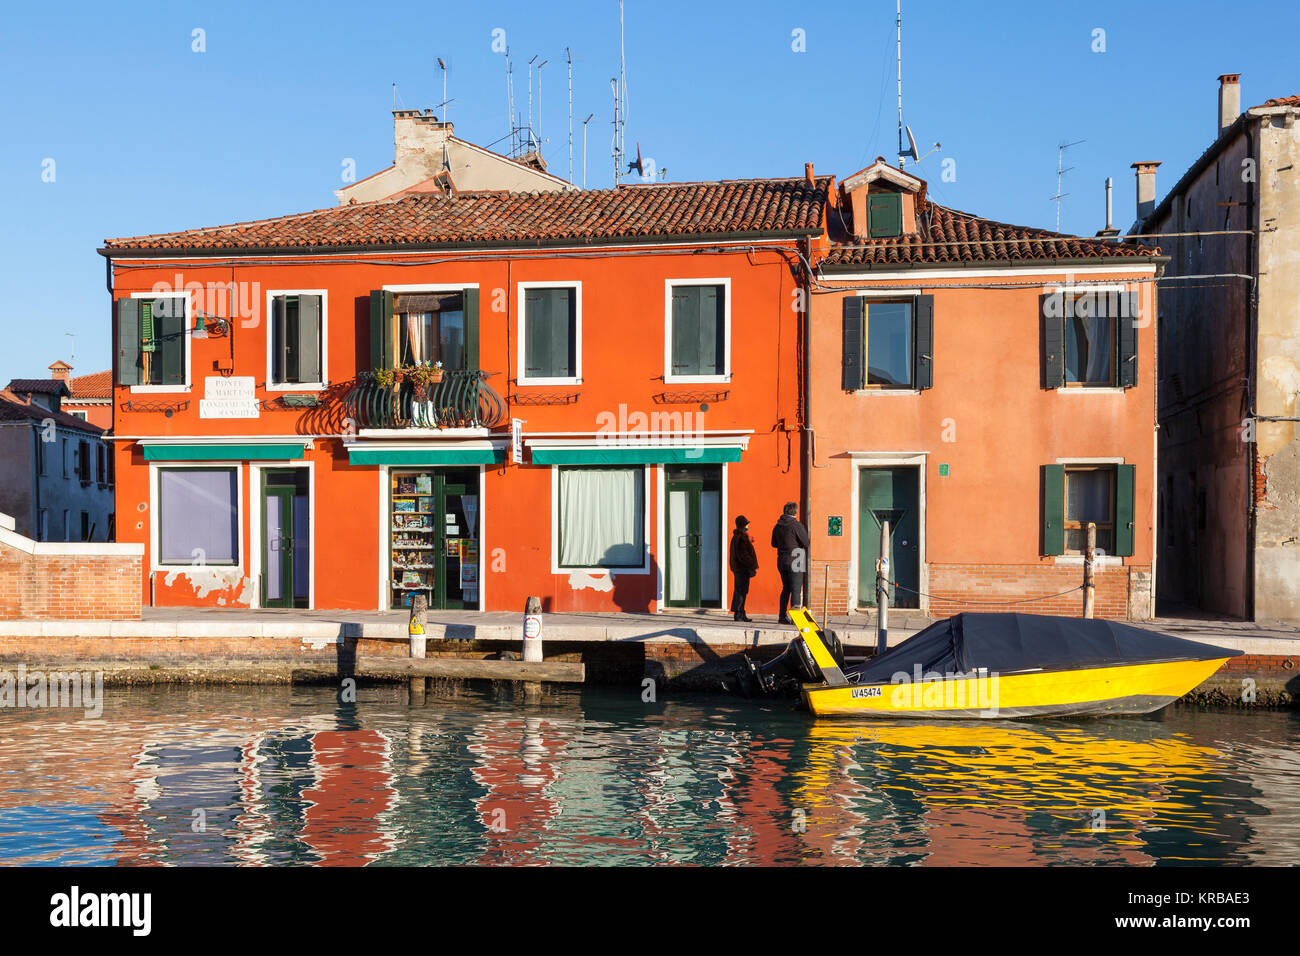 Colorful houses and boat at sunset, Murano Island, Venice, Italy with a couple strolling on Fondamenta A Maschio and reflections in the canal Stock Photo